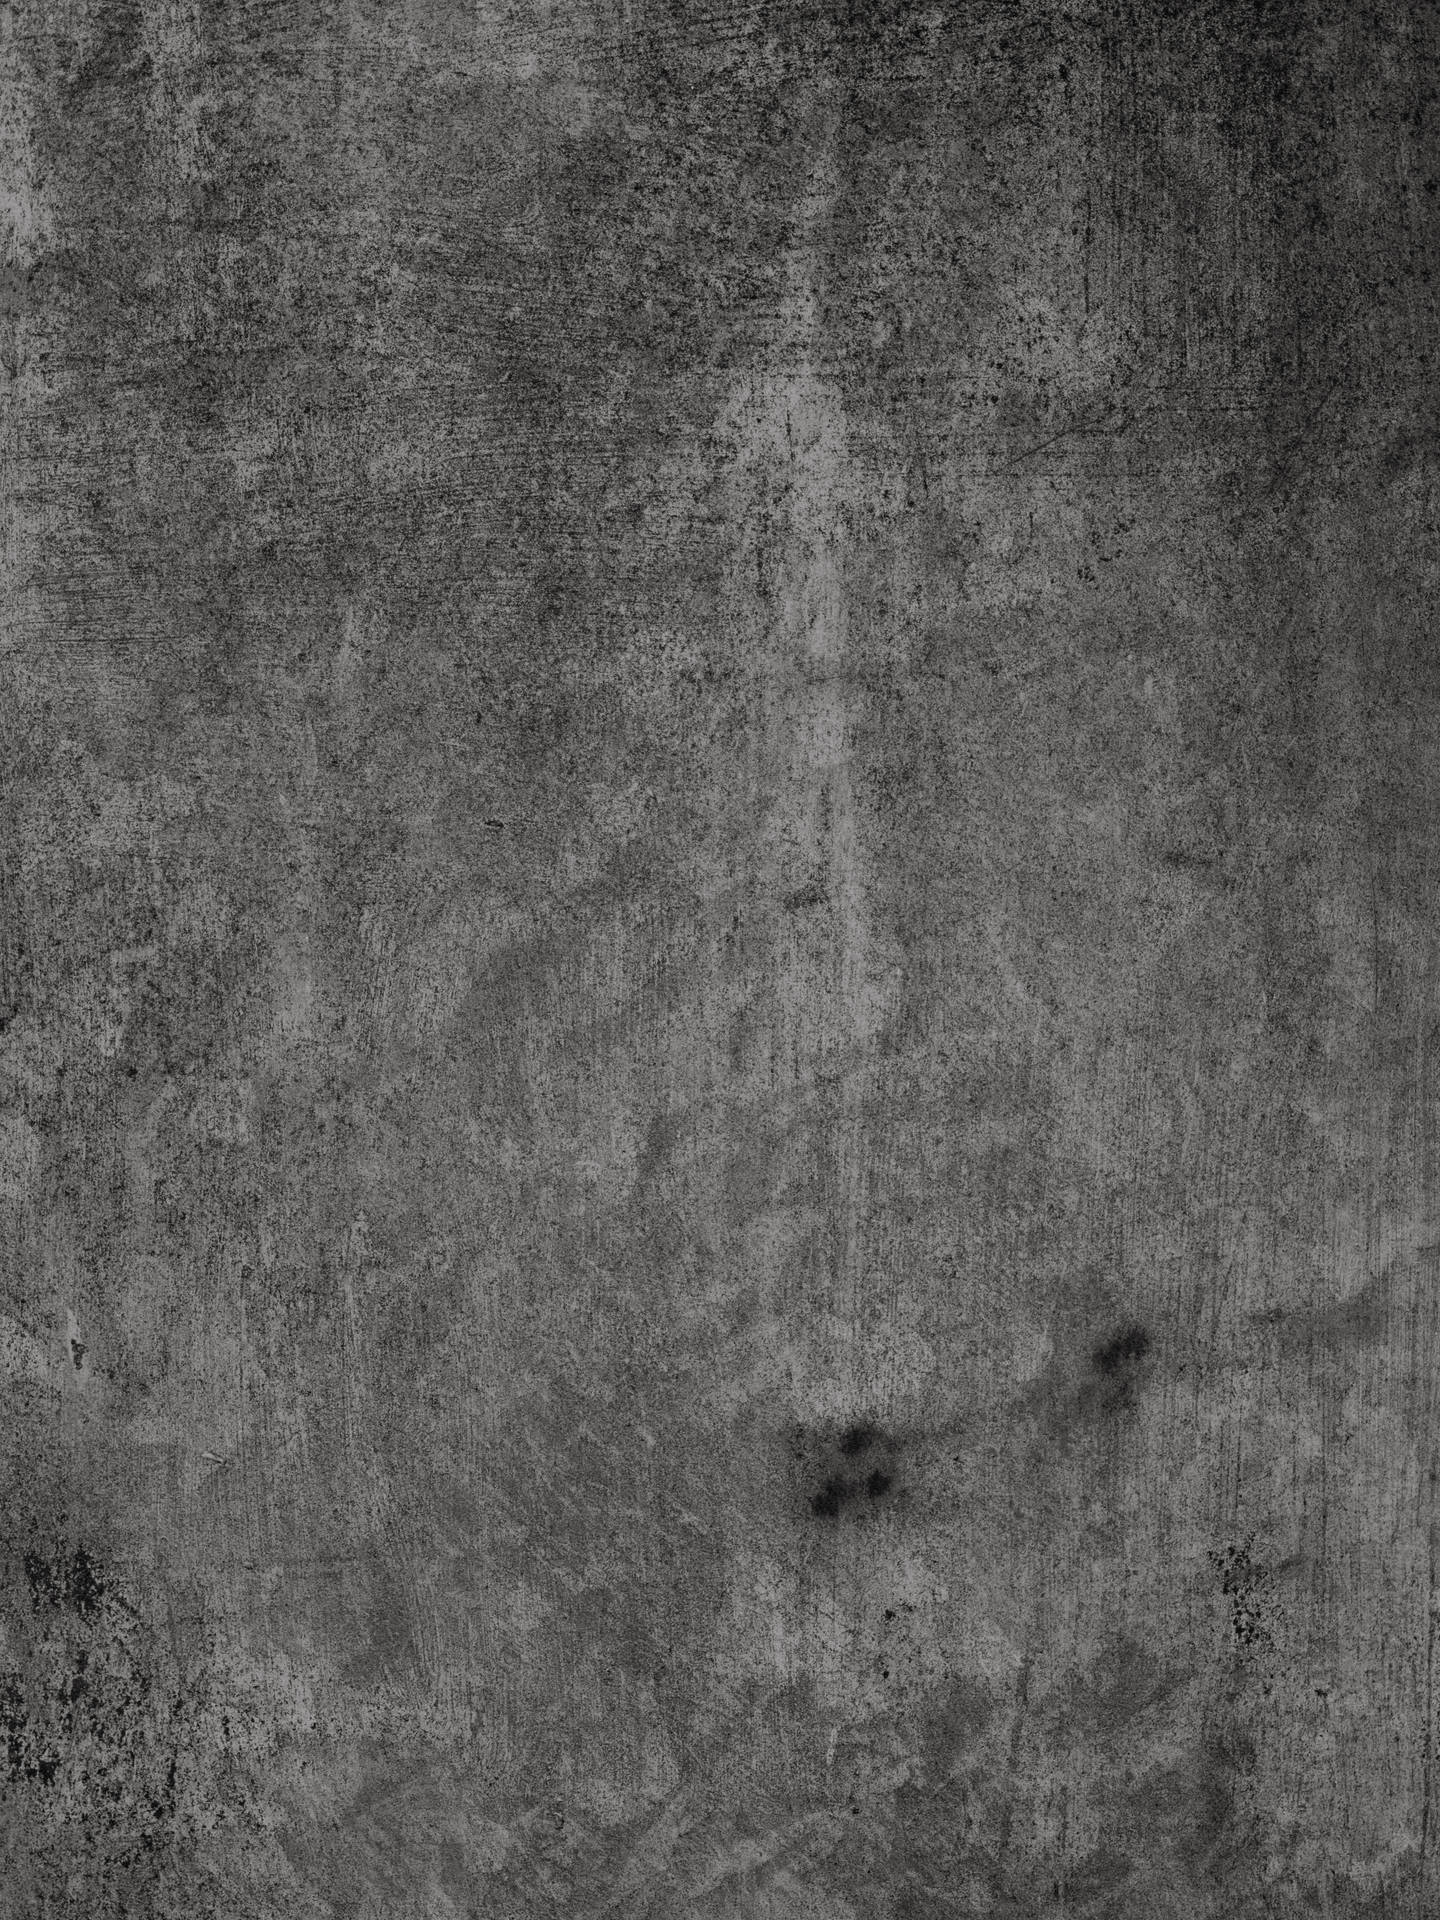 6192X8256 Grunge Wallpaper and Background